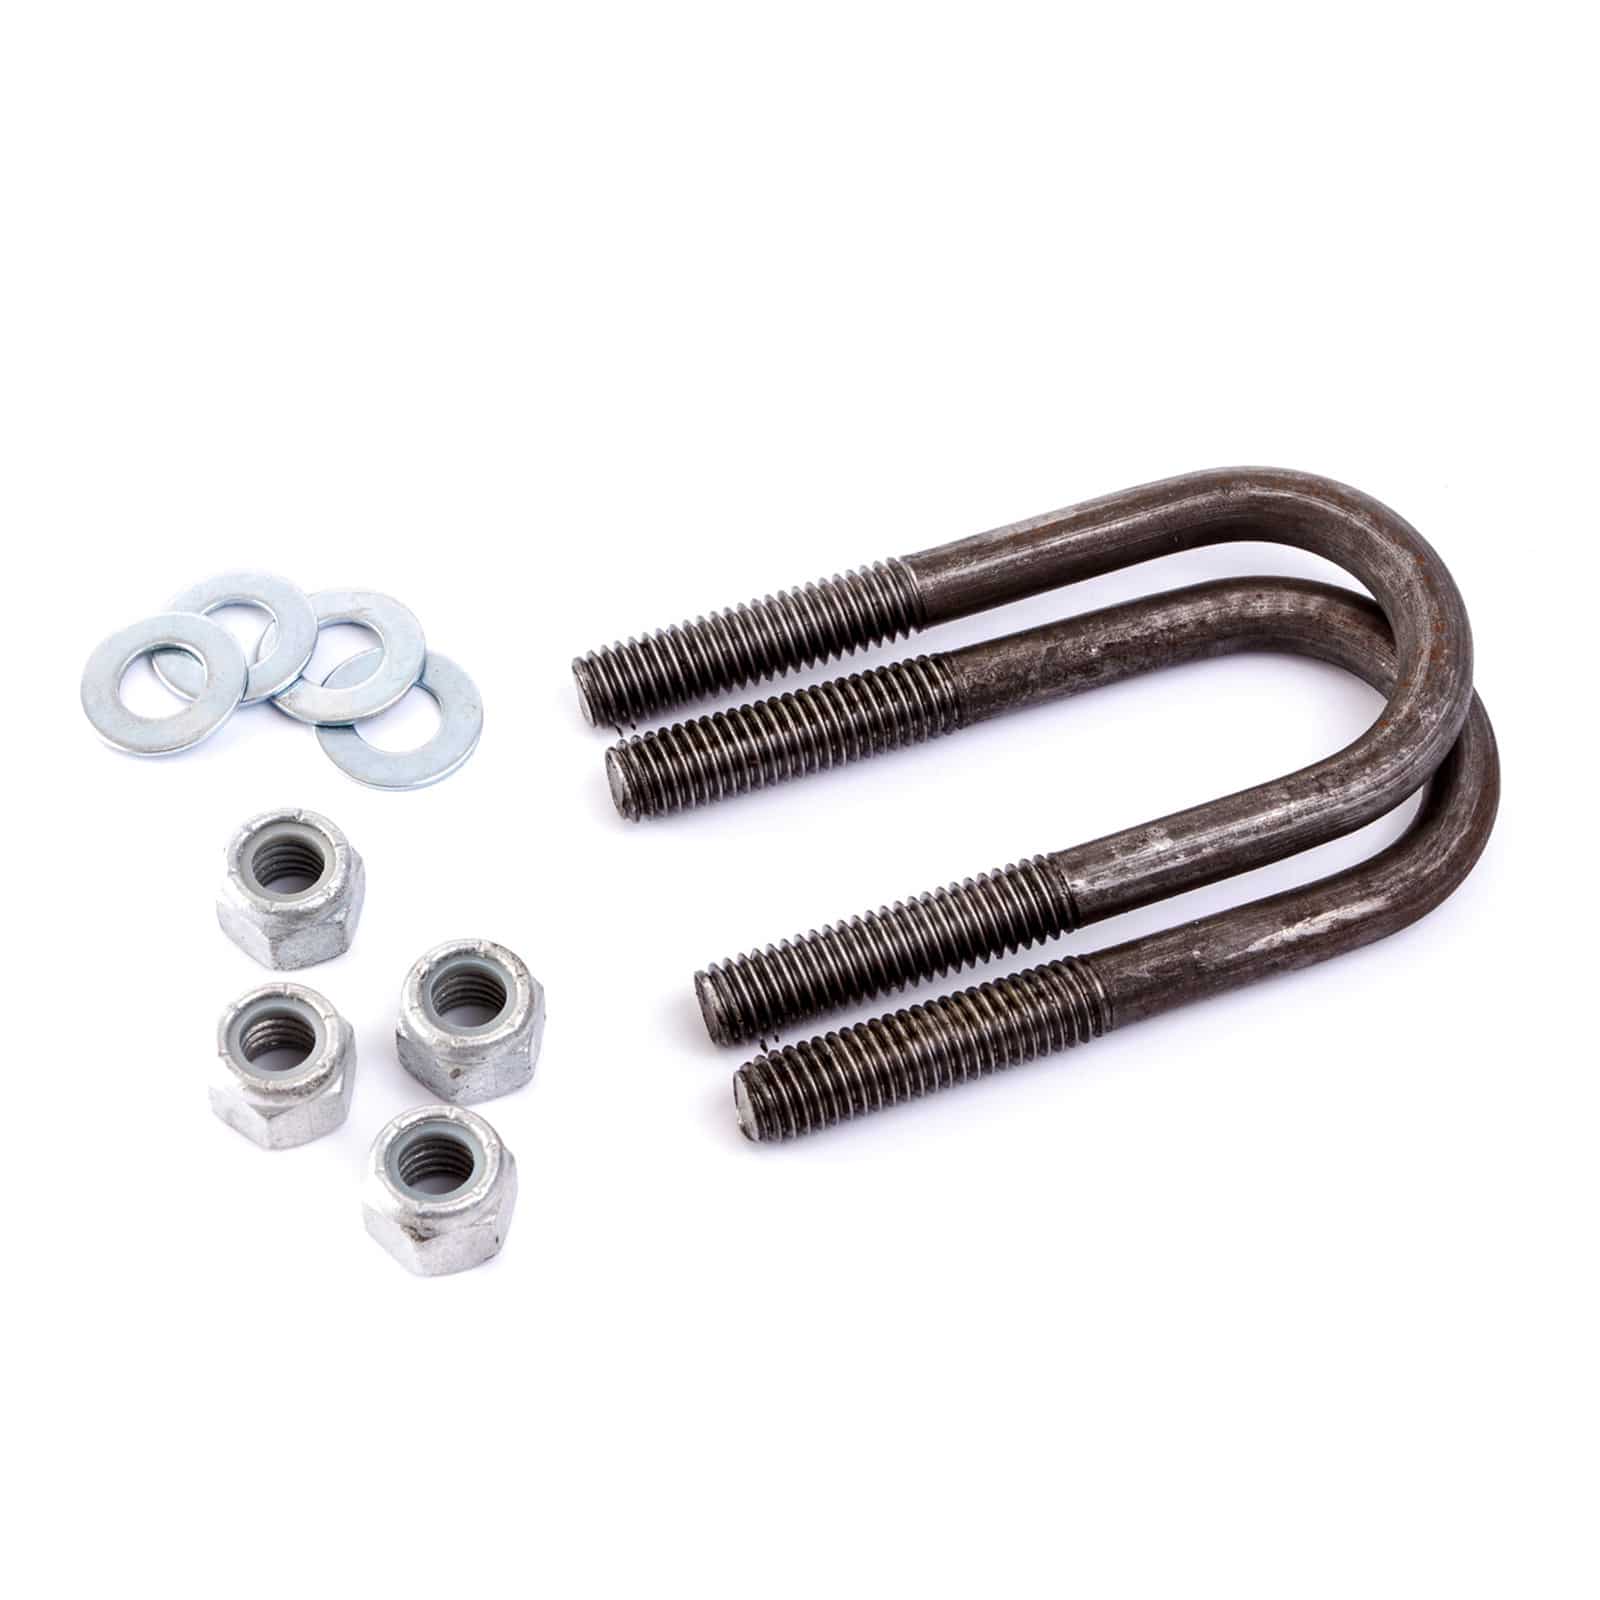 U Bolt Kit, includes 2 x U-Bolts, 4 x Nyloc Nuts, 4 x Washers to suit 39mm round axle